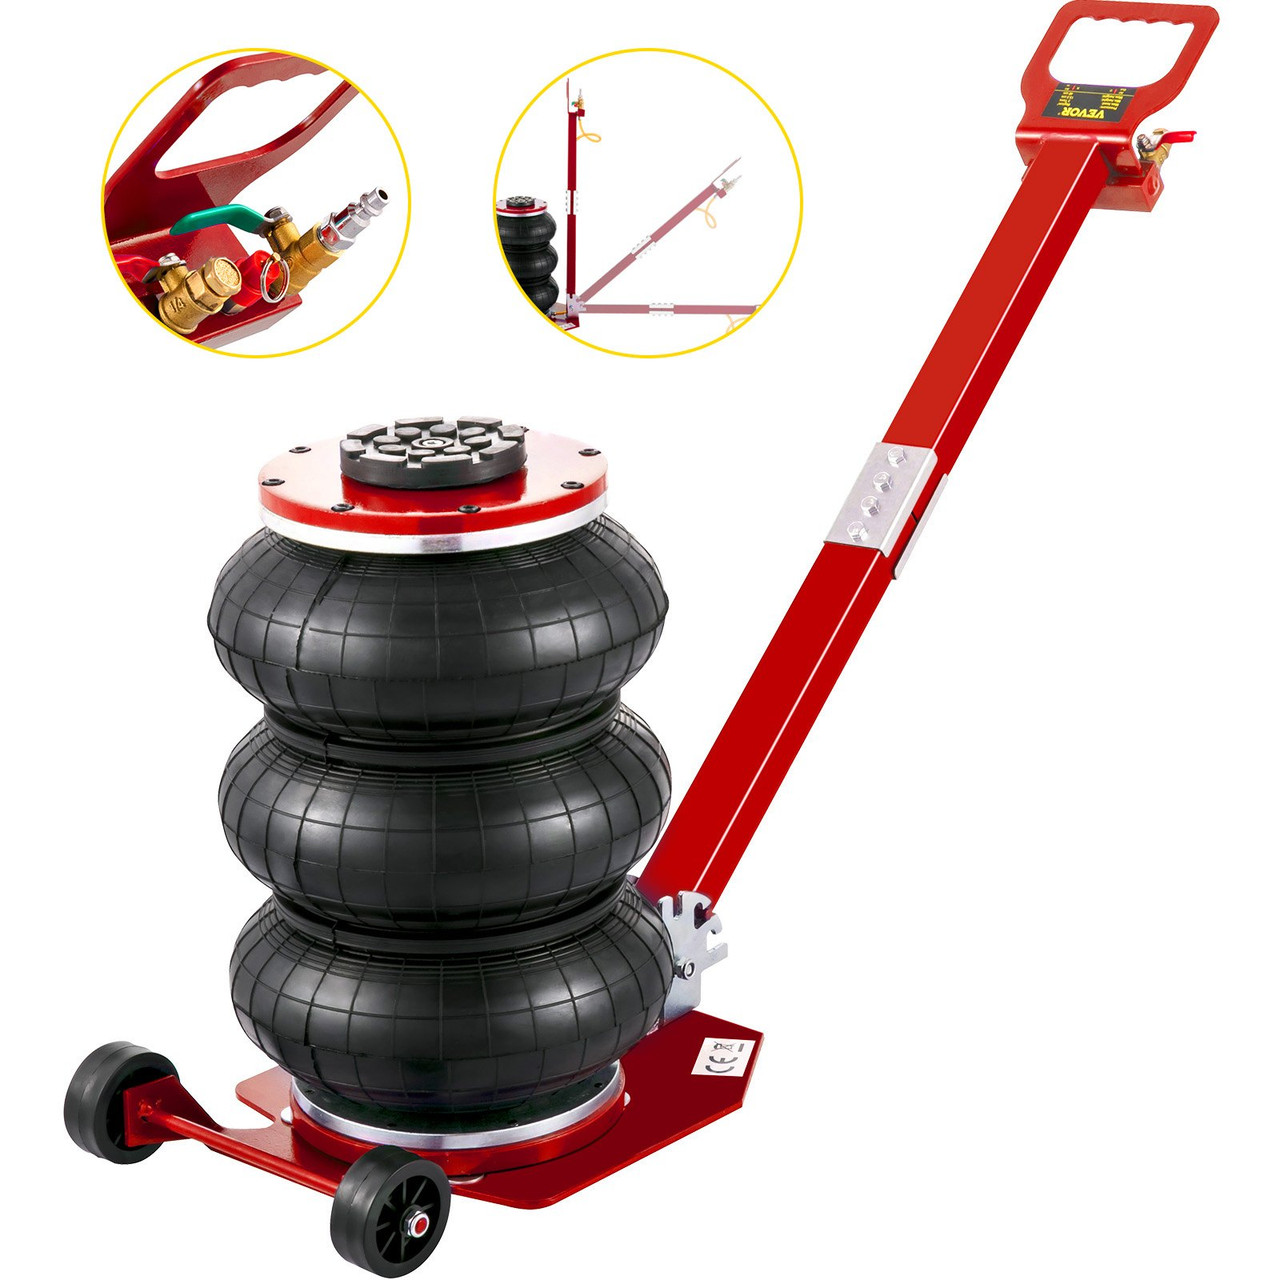 Bag Air Jack 6600lbs Capacity, Folding Rod Fast Lifting, Pneumatic Jack Quick Lift 3T, Pneumatic Car Jack with Two Wheels for Quick Car Lifting Jack Repair(RED)